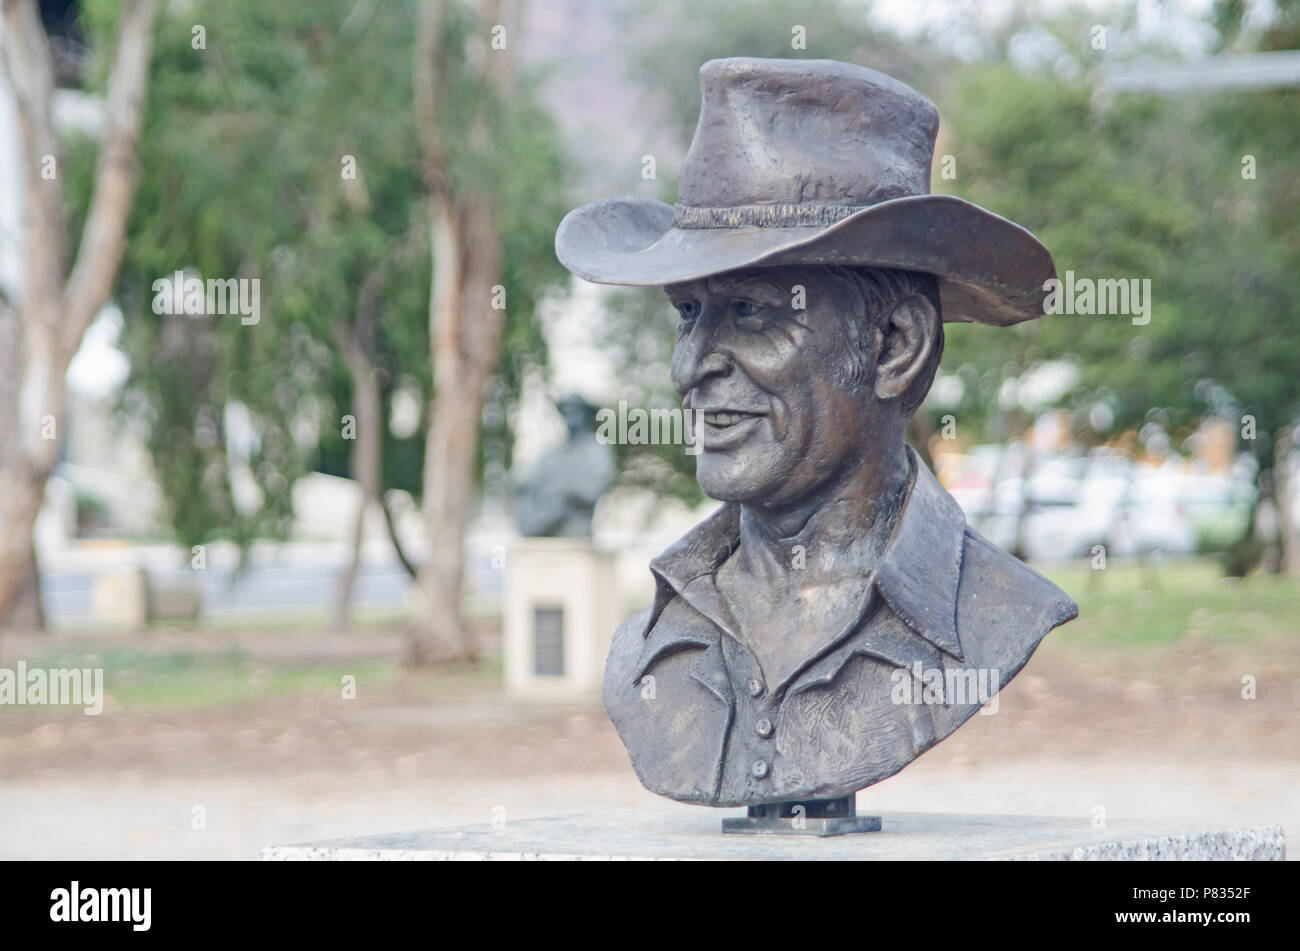 Sculpture of Reg Lindsay (1929-2008) on display at Bicentennial Park, Tamworth NSW Australia. Sculpted by Kate French. Stock Photo